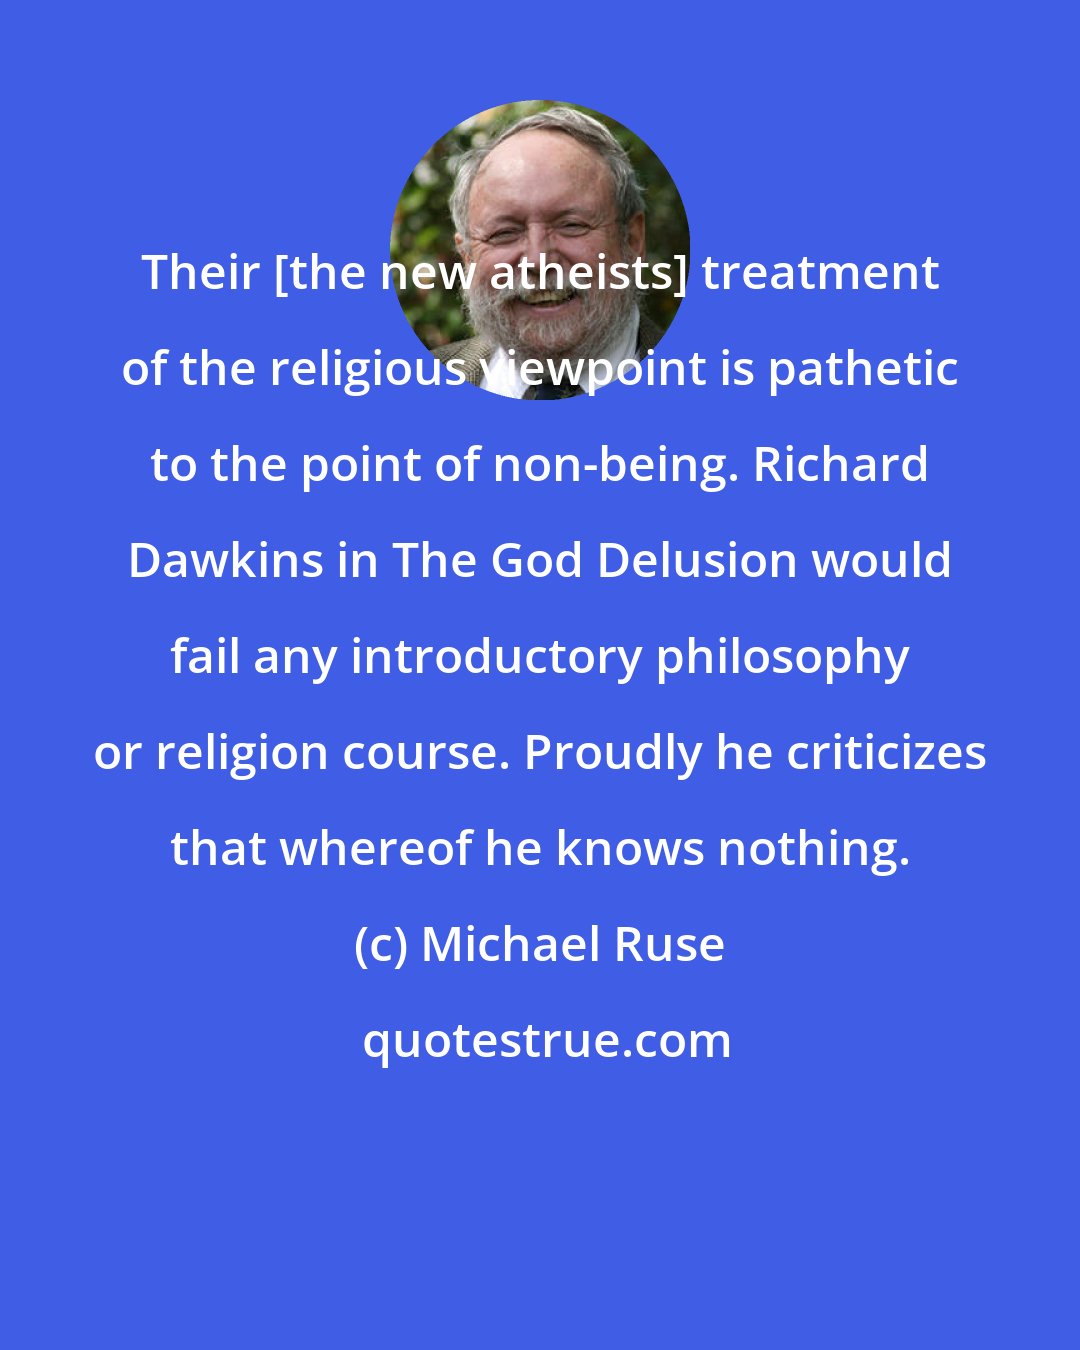 Michael Ruse: Their [the new atheists] treatment of the religious viewpoint is pathetic to the point of non-being. Richard Dawkins in The God Delusion would fail any introductory philosophy or religion course. Proudly he criticizes that whereof he knows nothing.